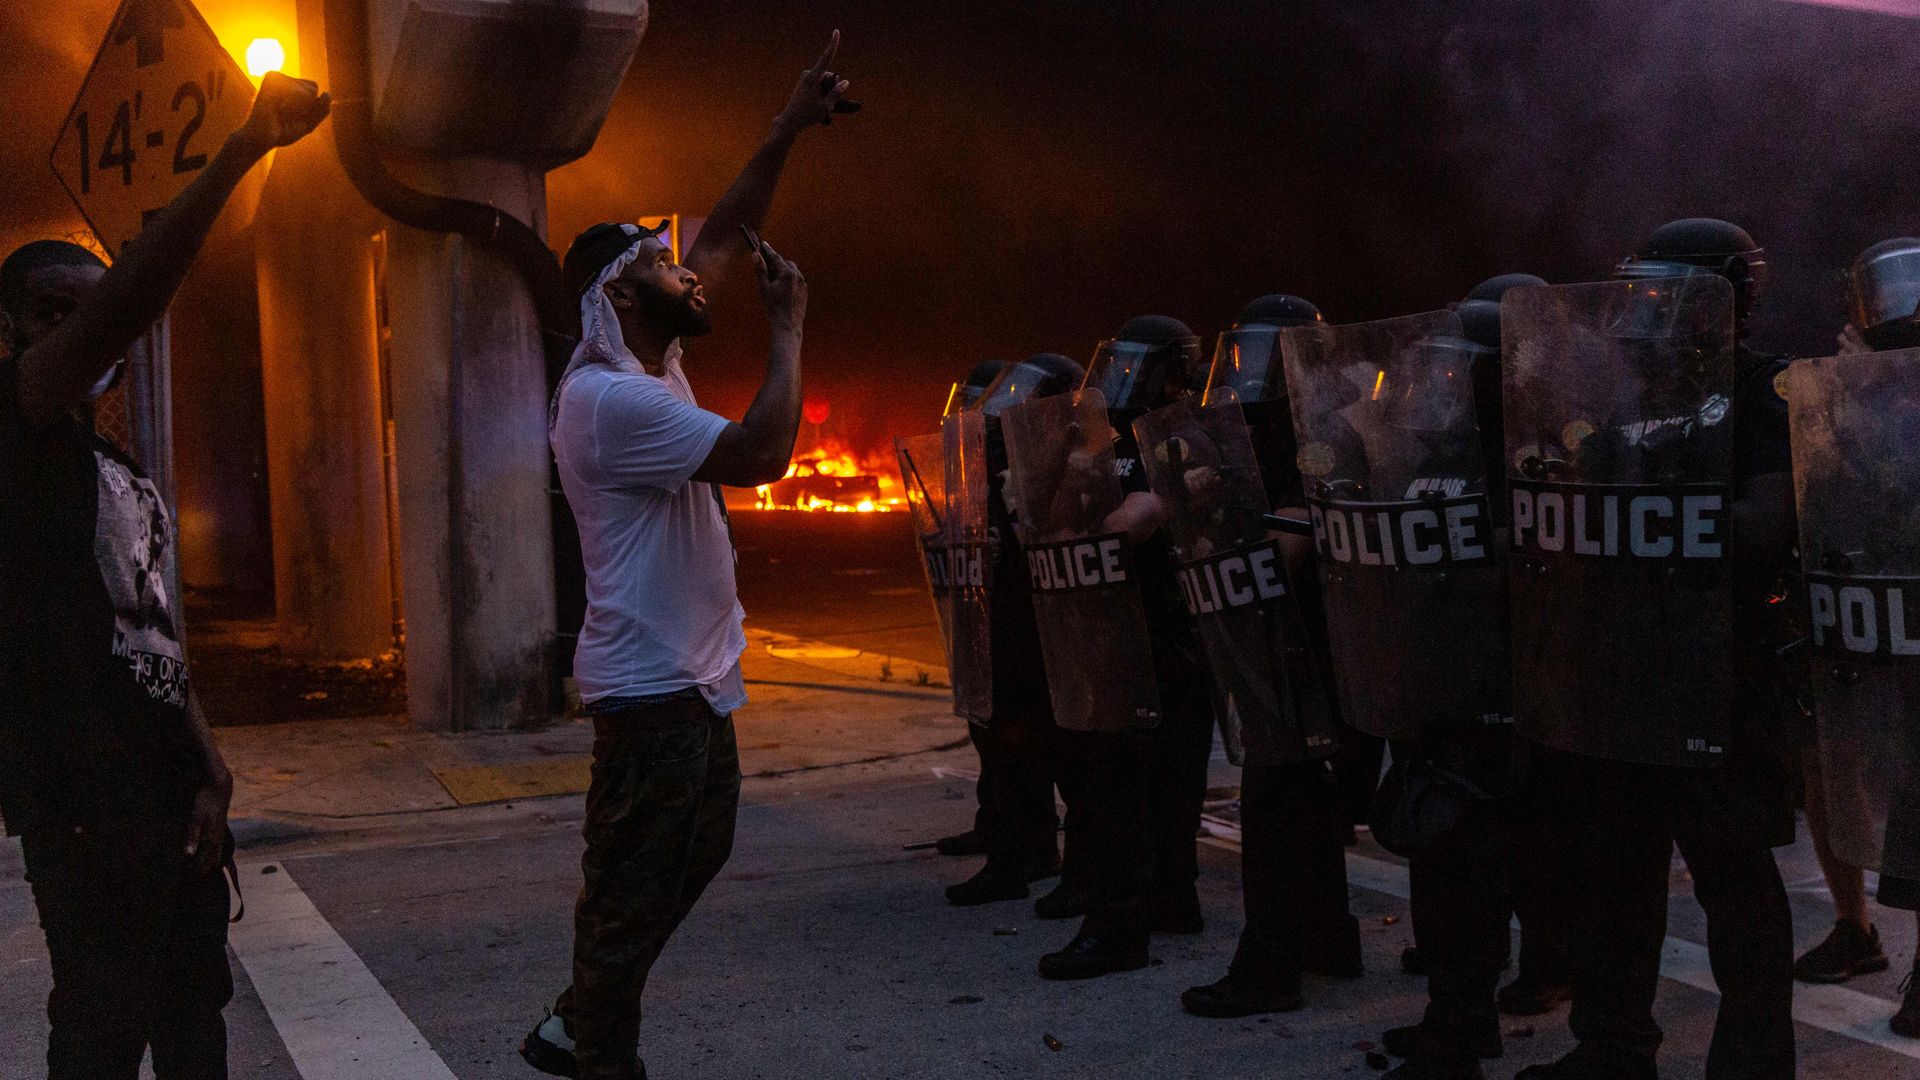 Protesters confronting police in riot gear in May 2020 in Miami, Florida, during demonstrations over the death of George Floyd.